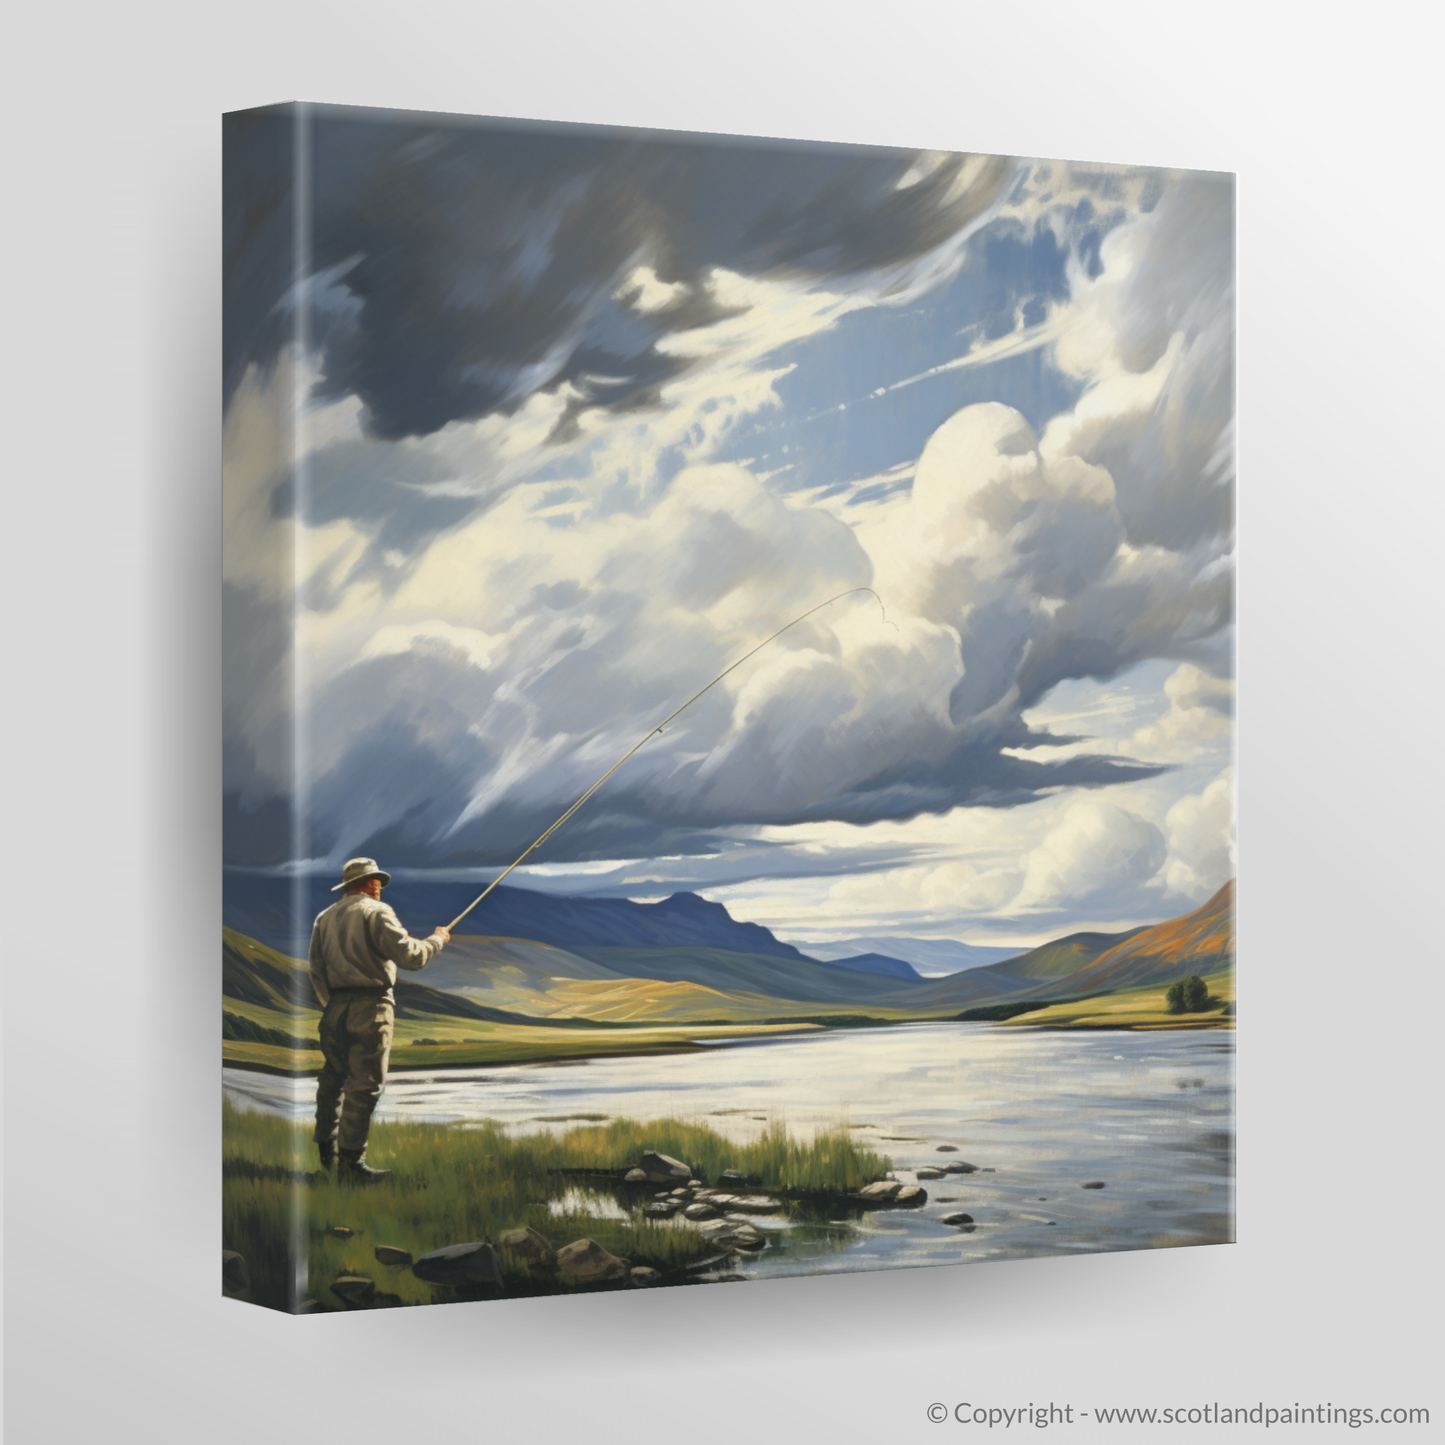 Highland Solitude: Fly Fishing on Loch Leven